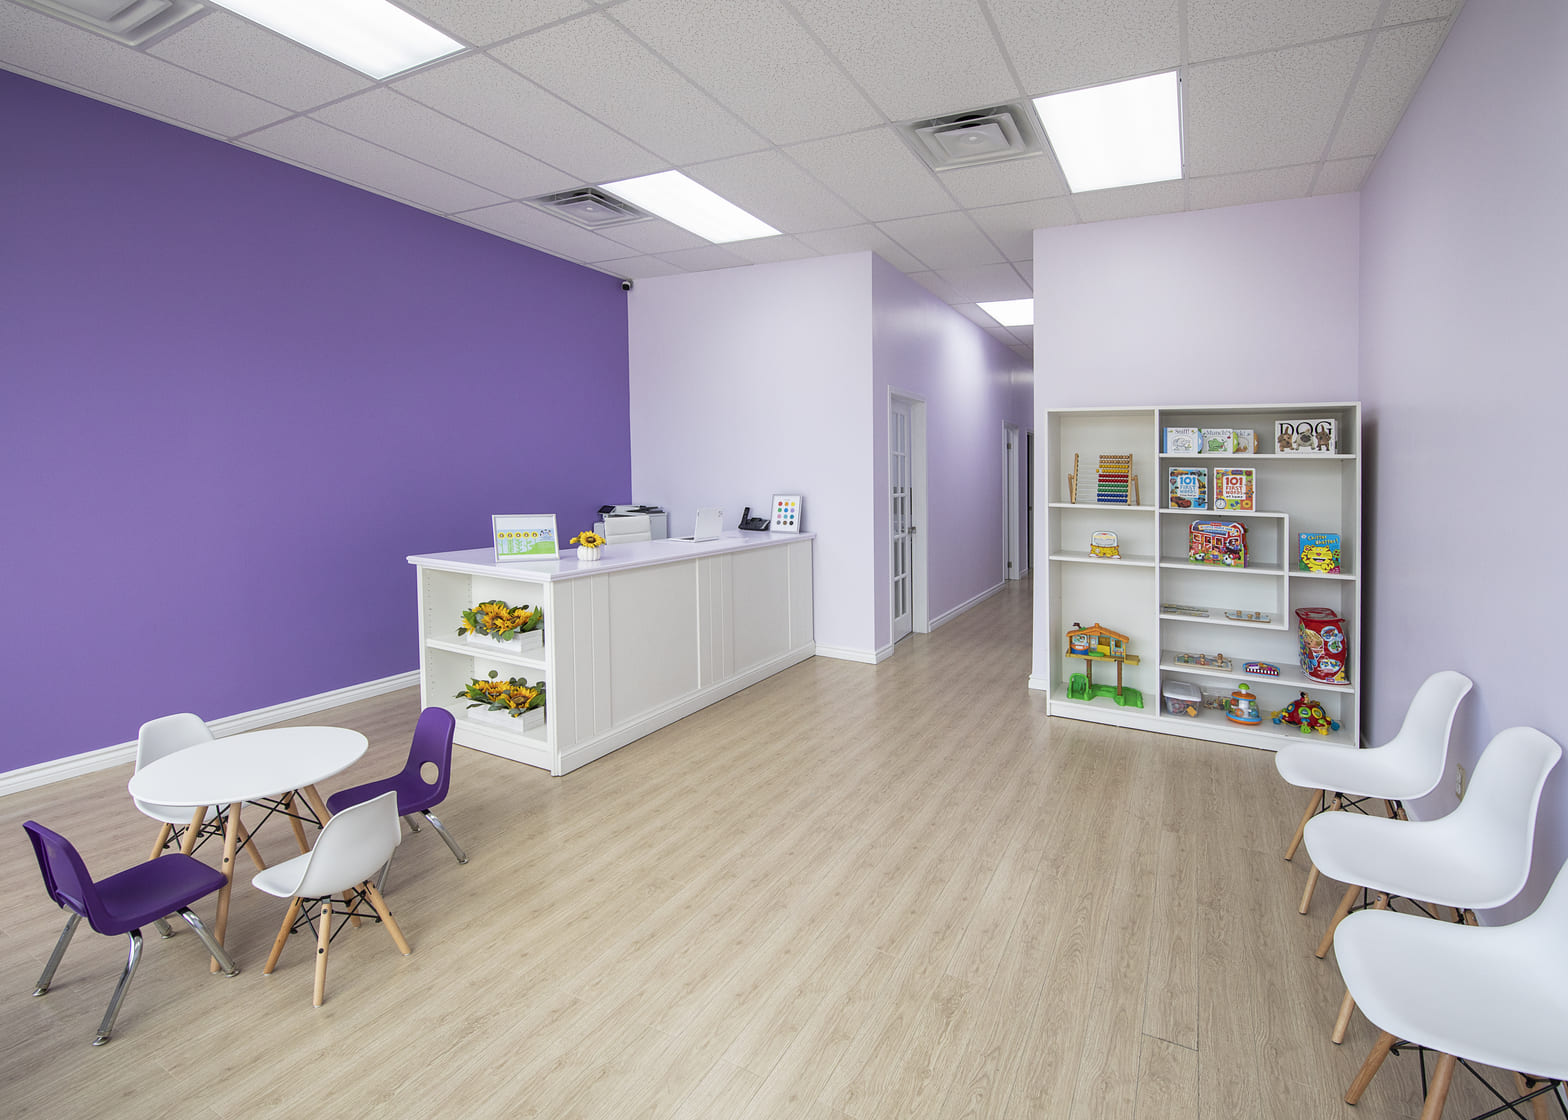 the speech therapy clinic